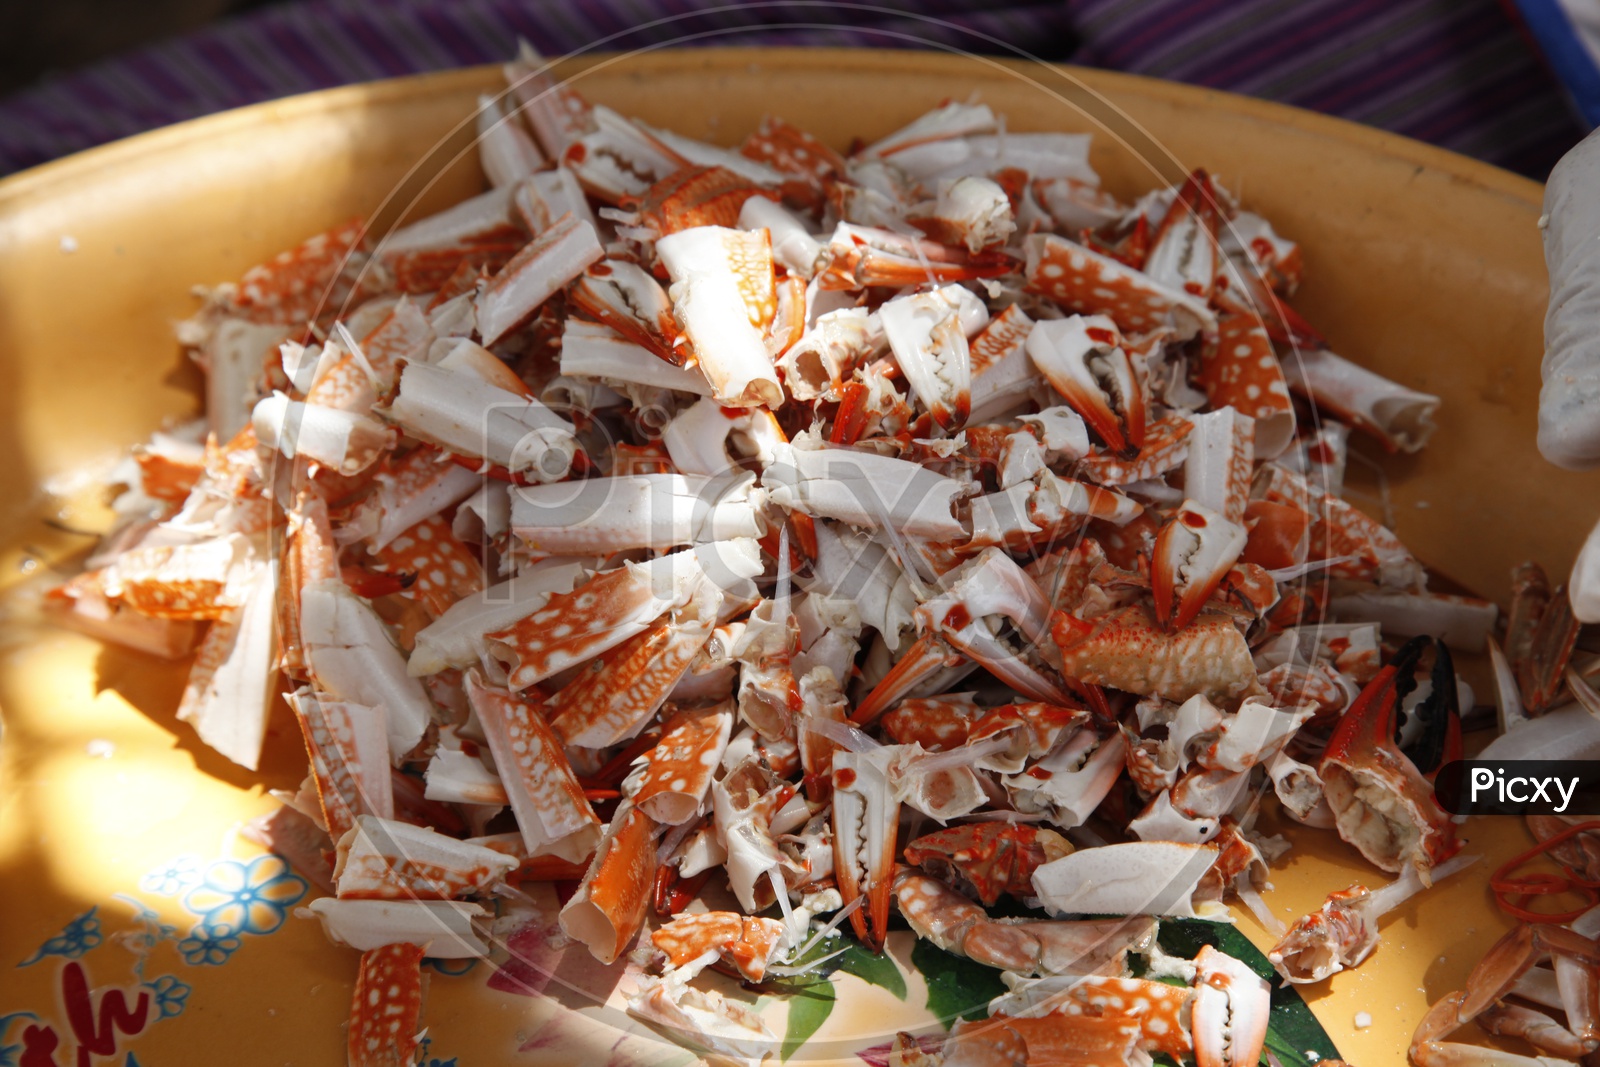 Crab Shells remains in a Plate